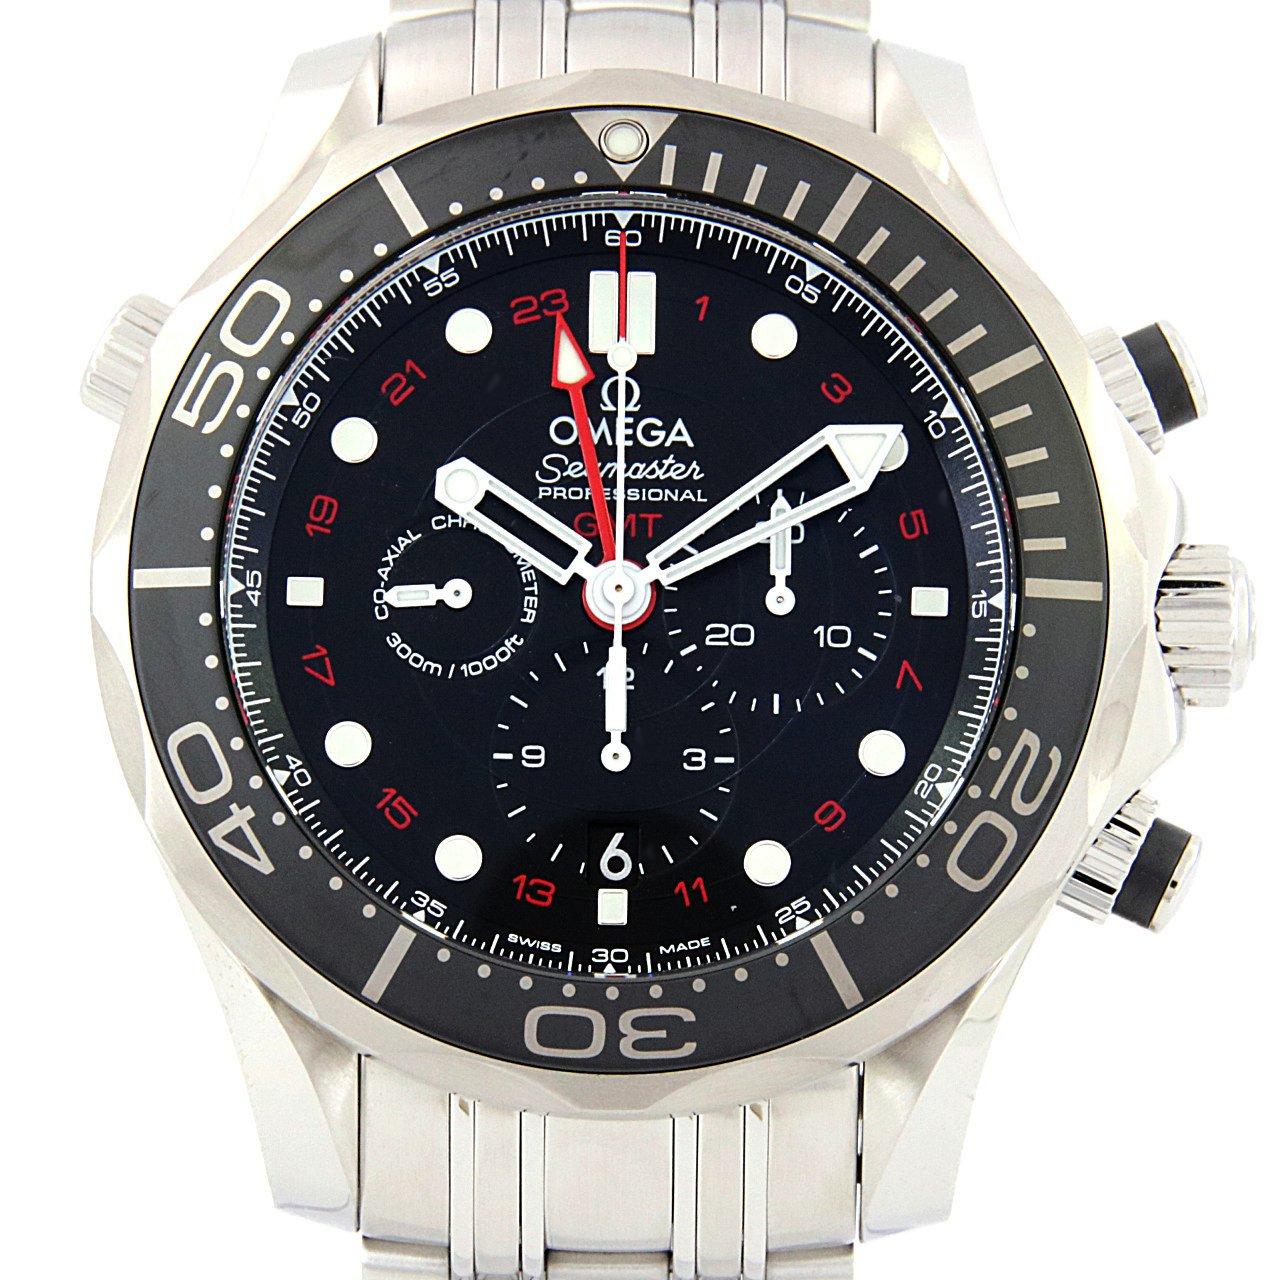 [BRAND NEW] Omega Seamaster Diver 300M GMT Chronograph 212.30.44.52.01.001 SS Automatic